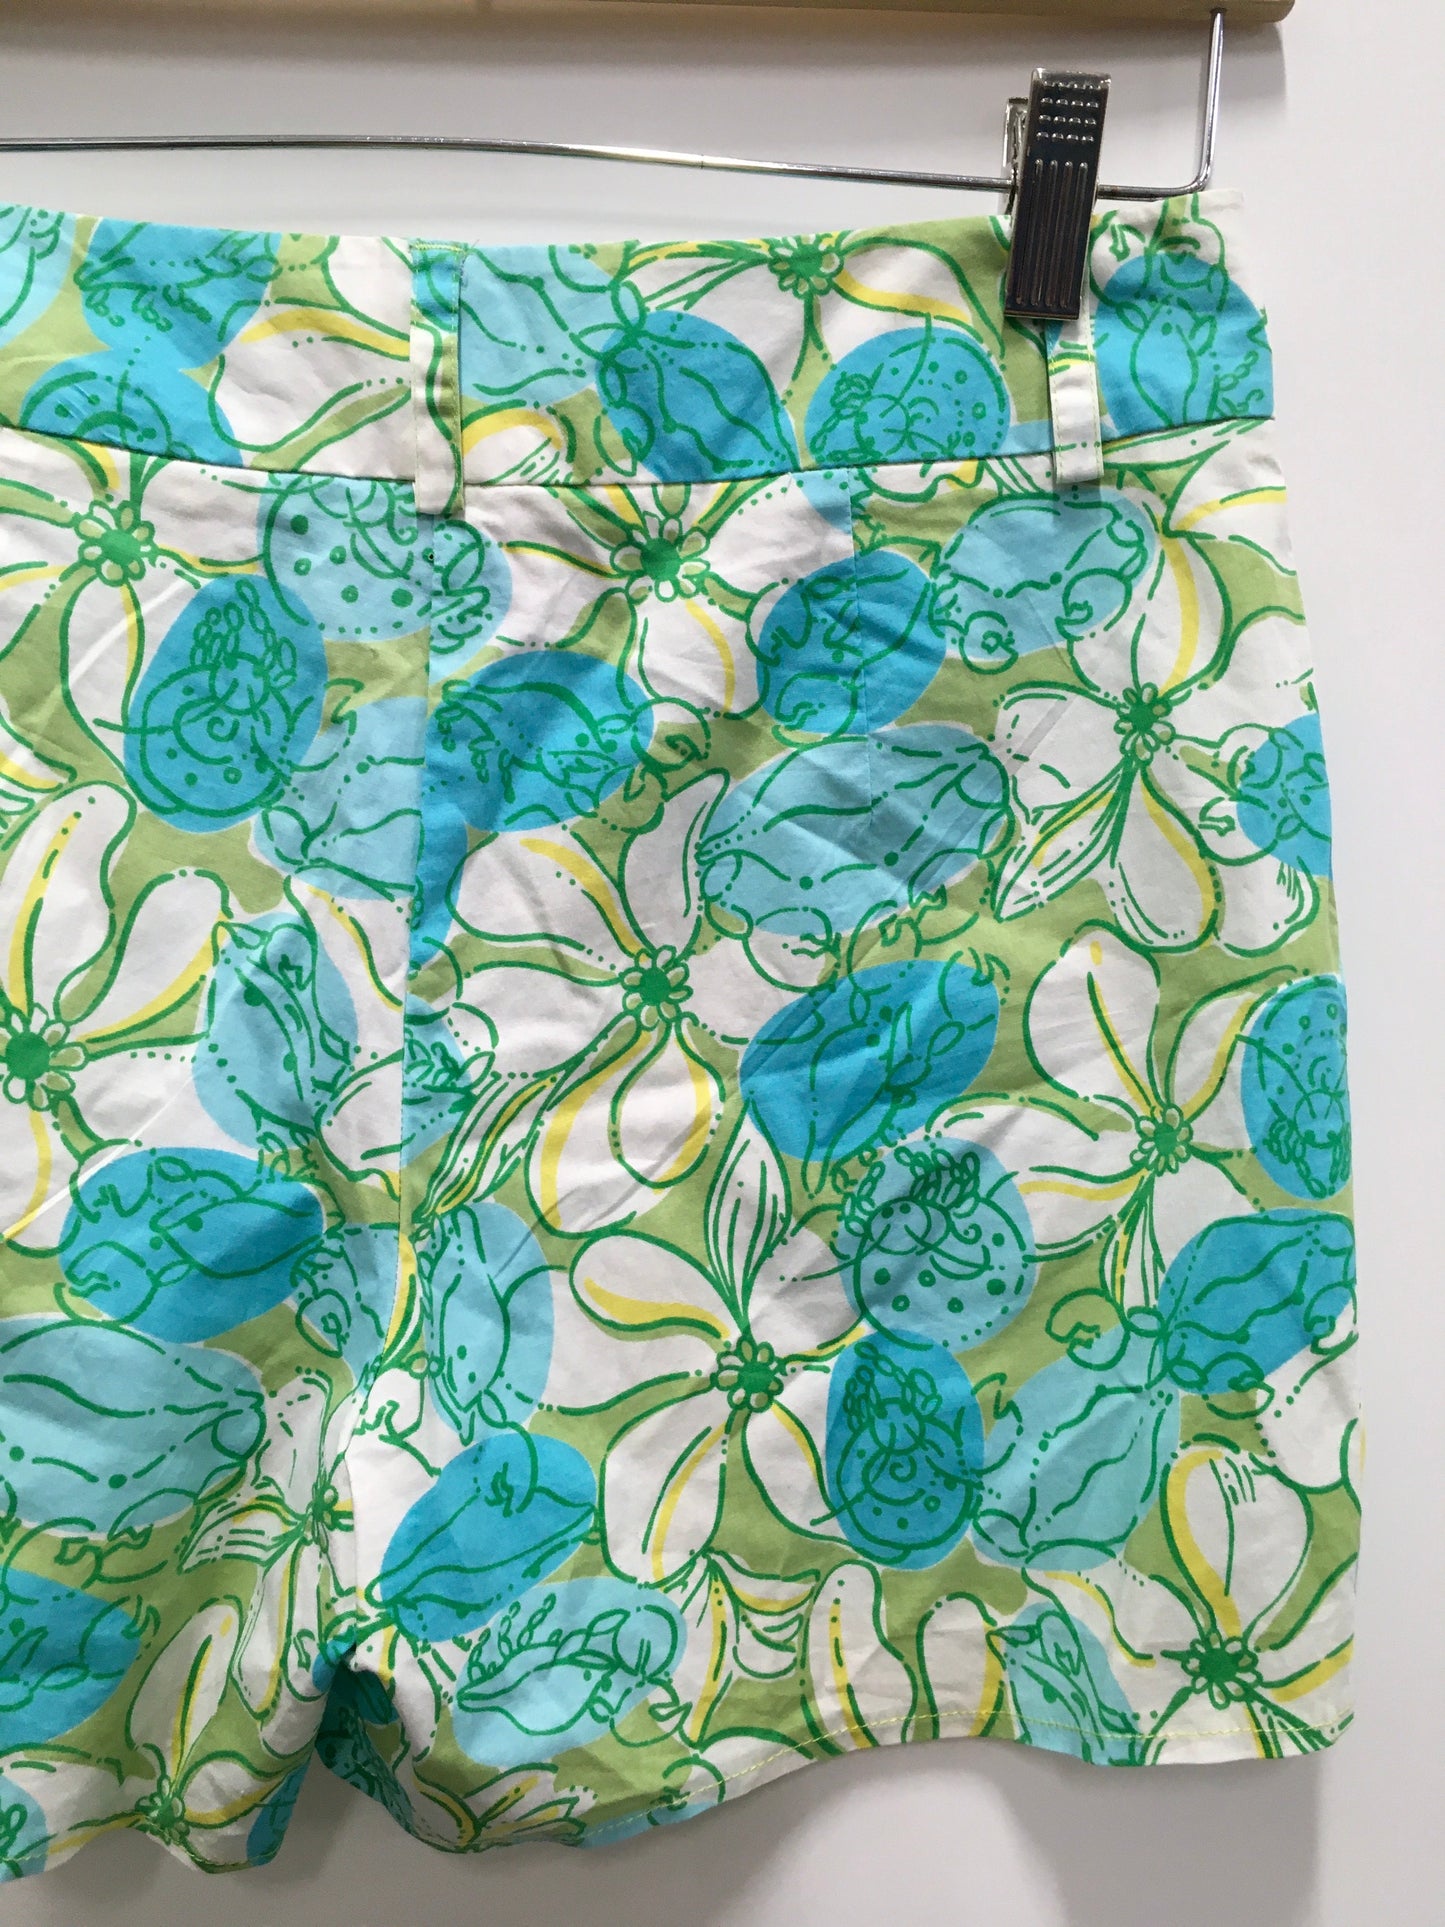 Shorts By Lilly Pulitzer  Size: 6